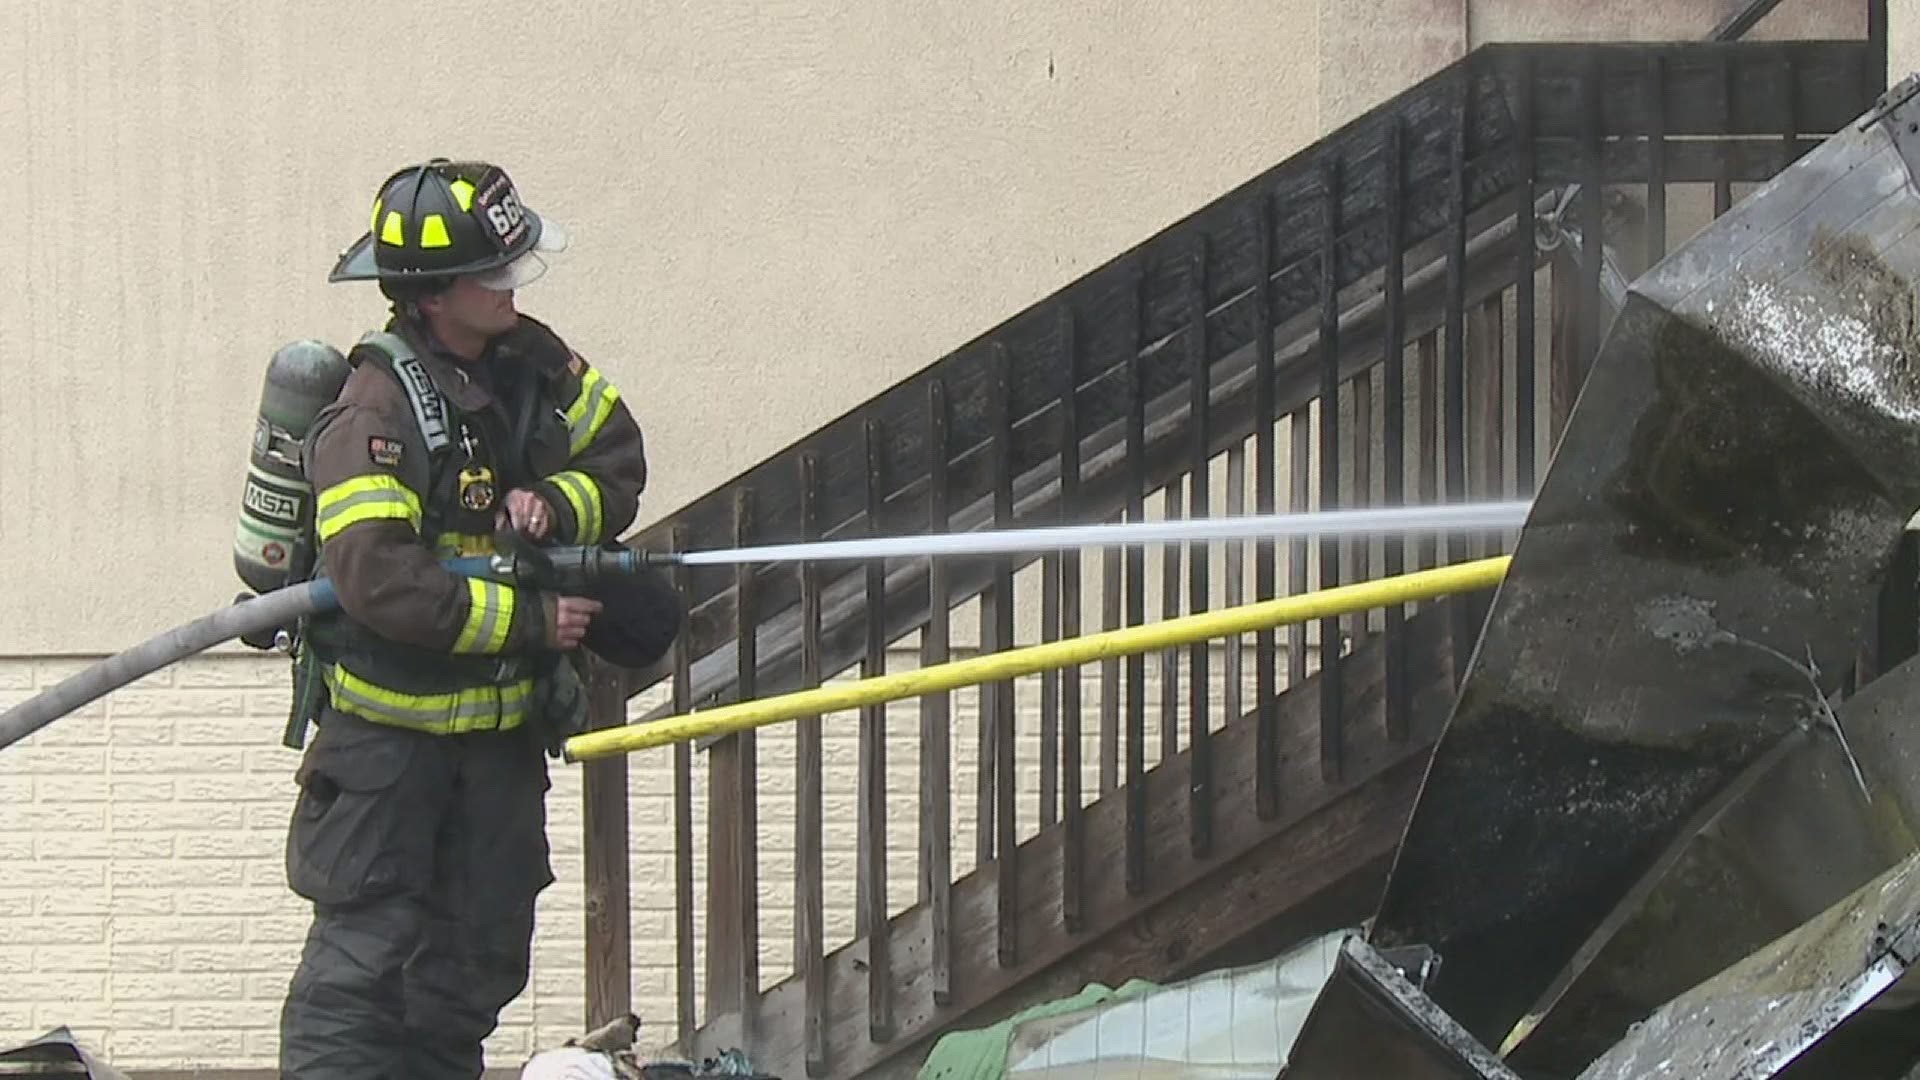 The Davenport Fire Department deployed three fire engines to handle a loading dock fire Tuesday afternoon.